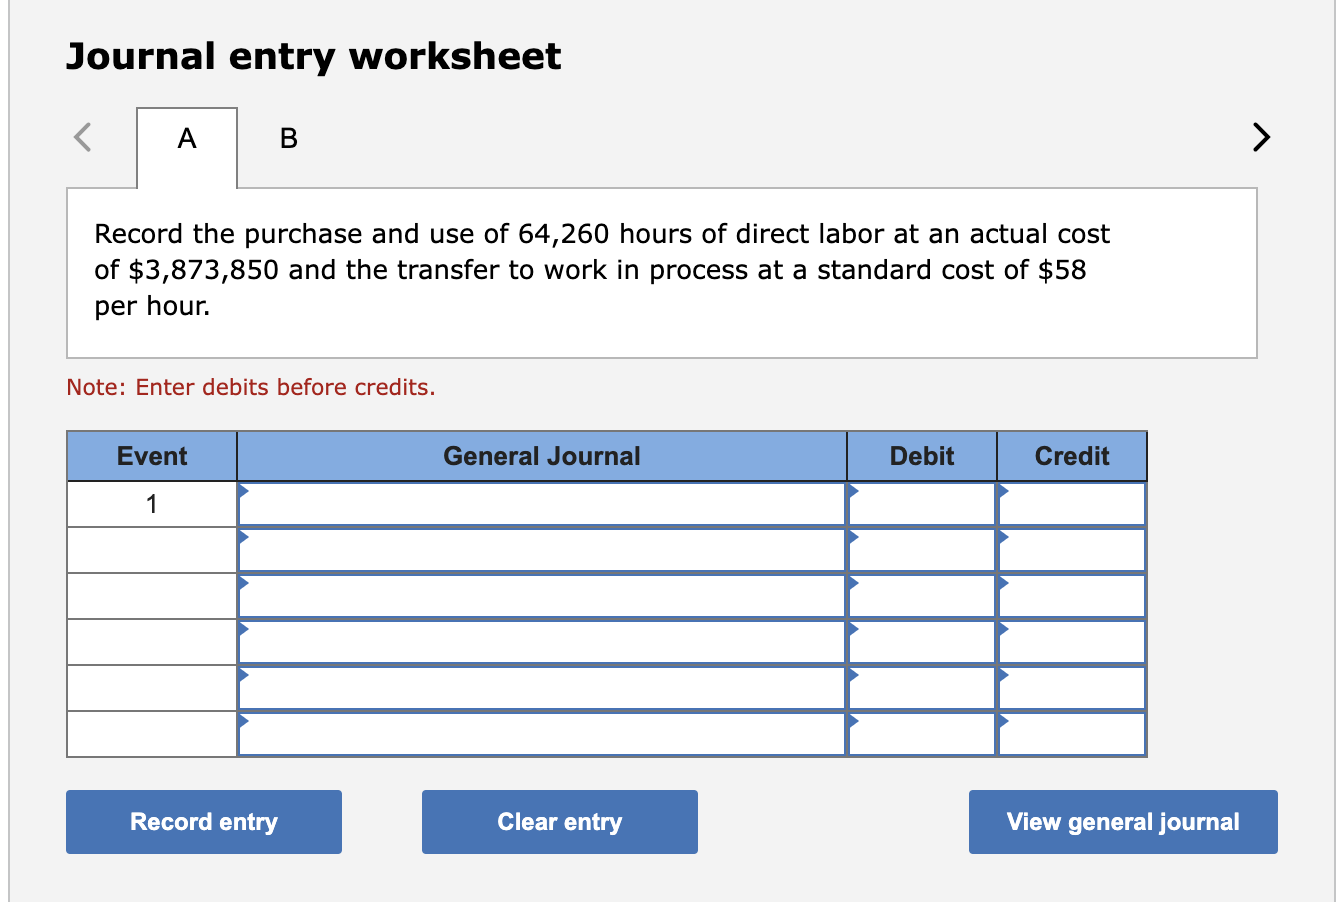 Journal entry worksheet A B Record the purchase and use of 64,260 hours of direct labor at an actual cost of